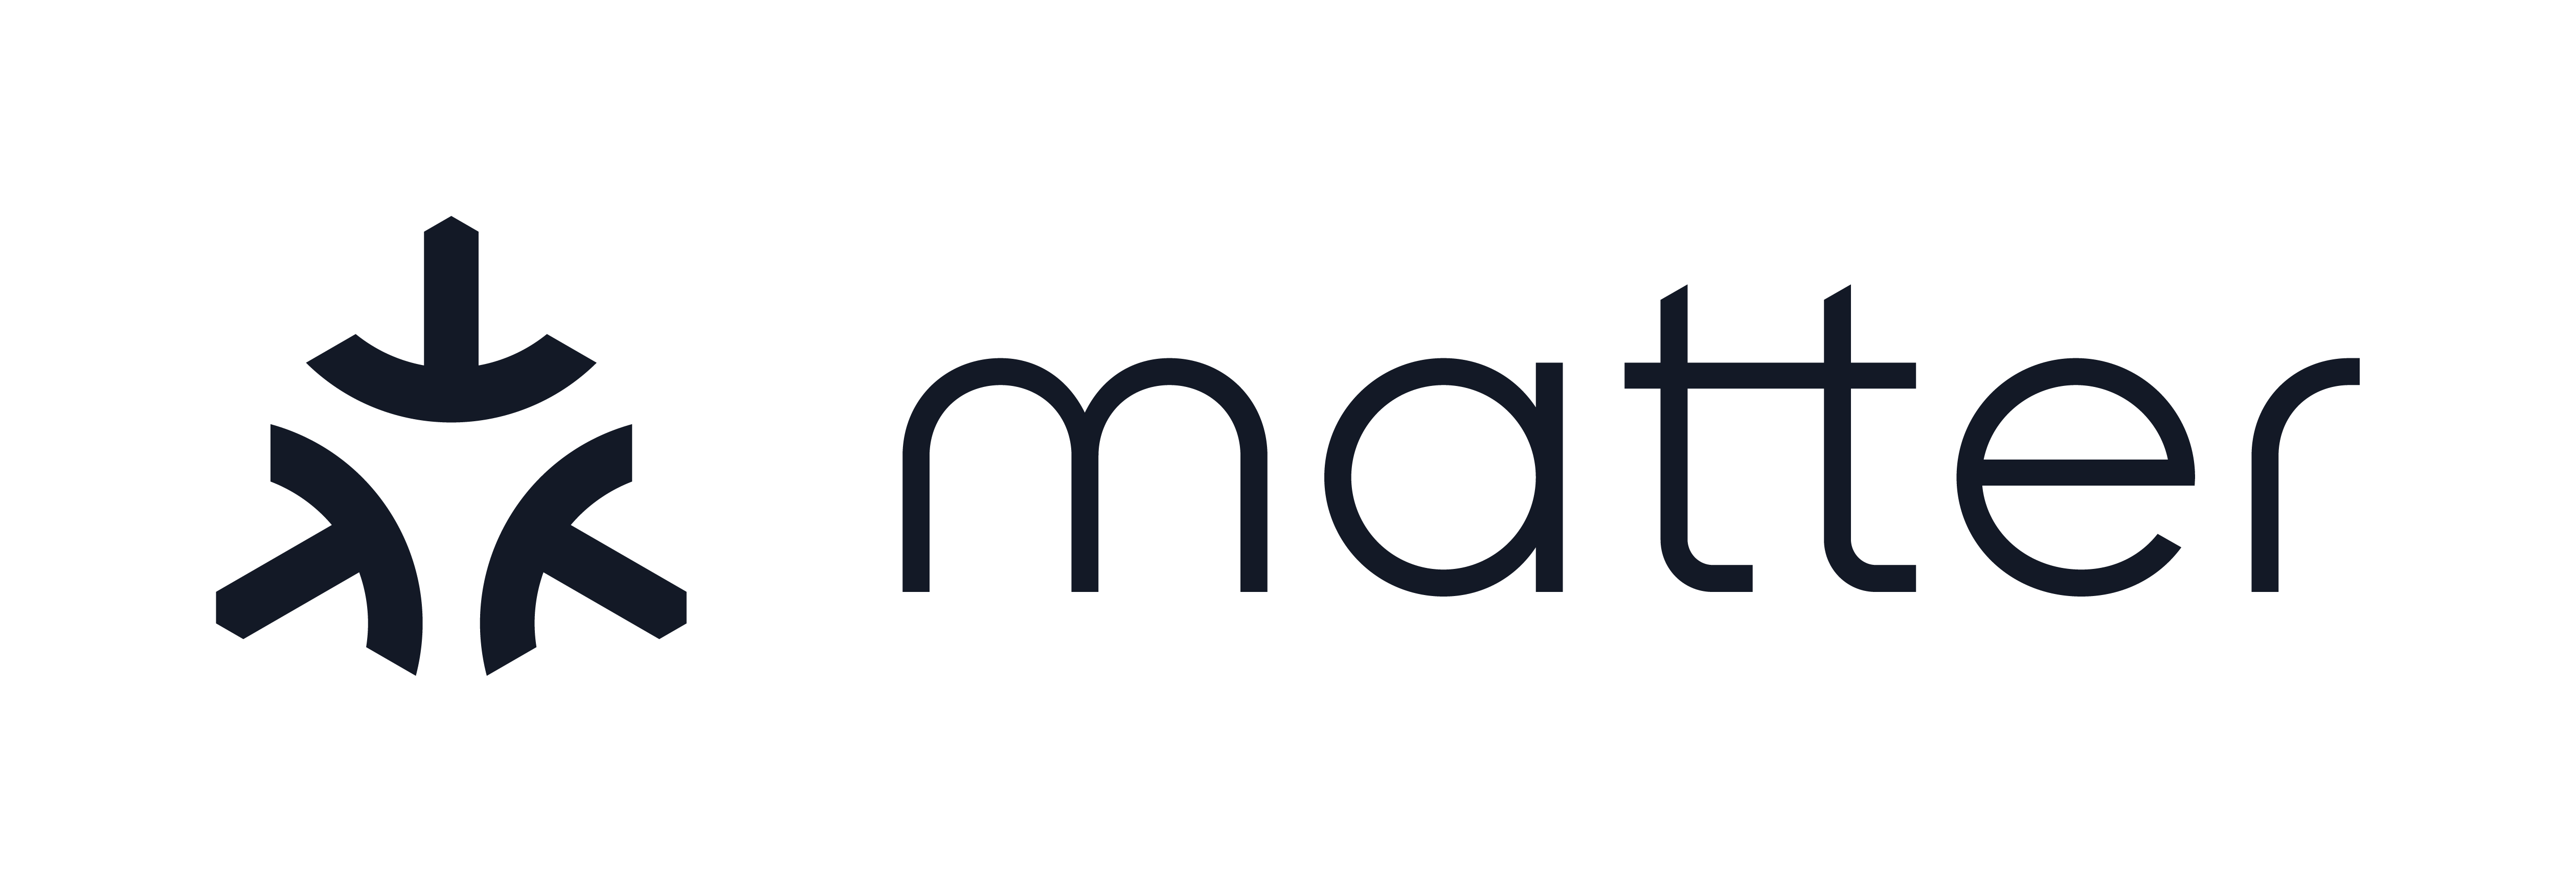 The material logo.